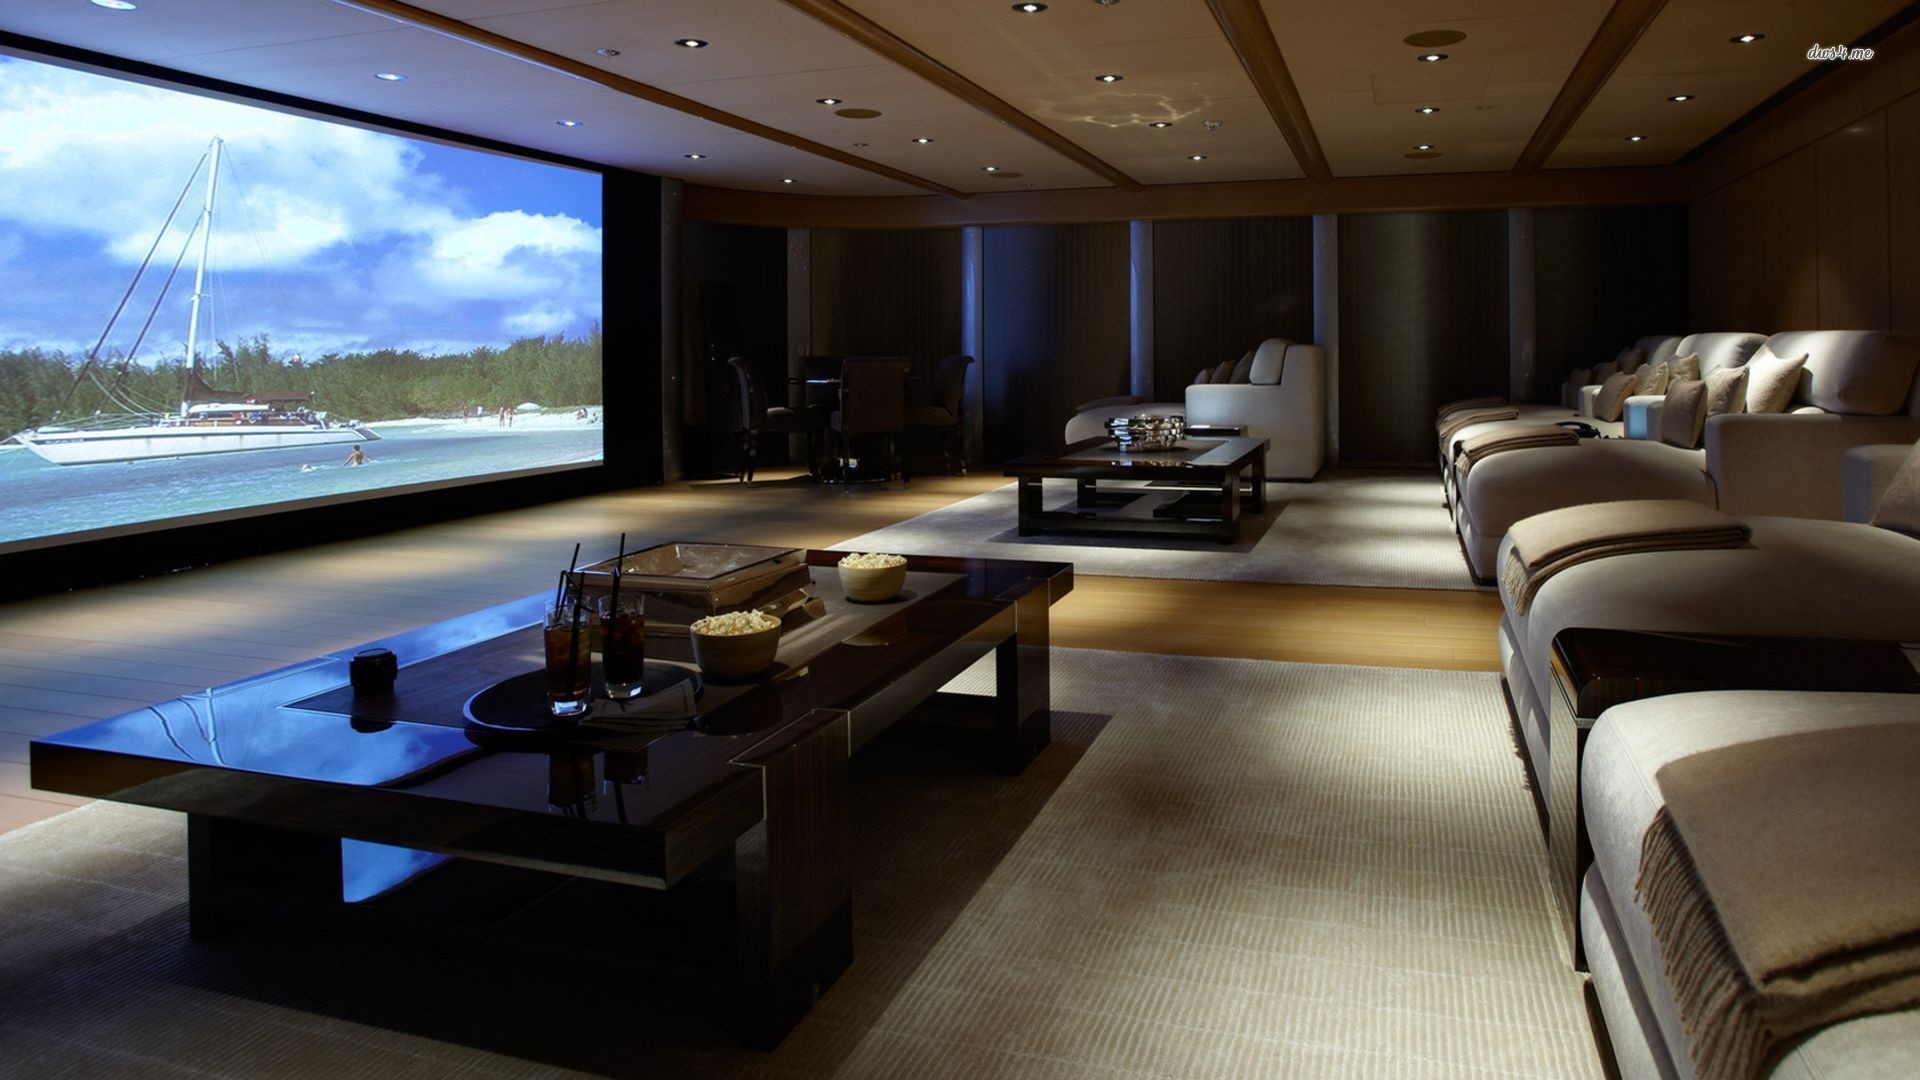 1920x1080 Home Theater W 